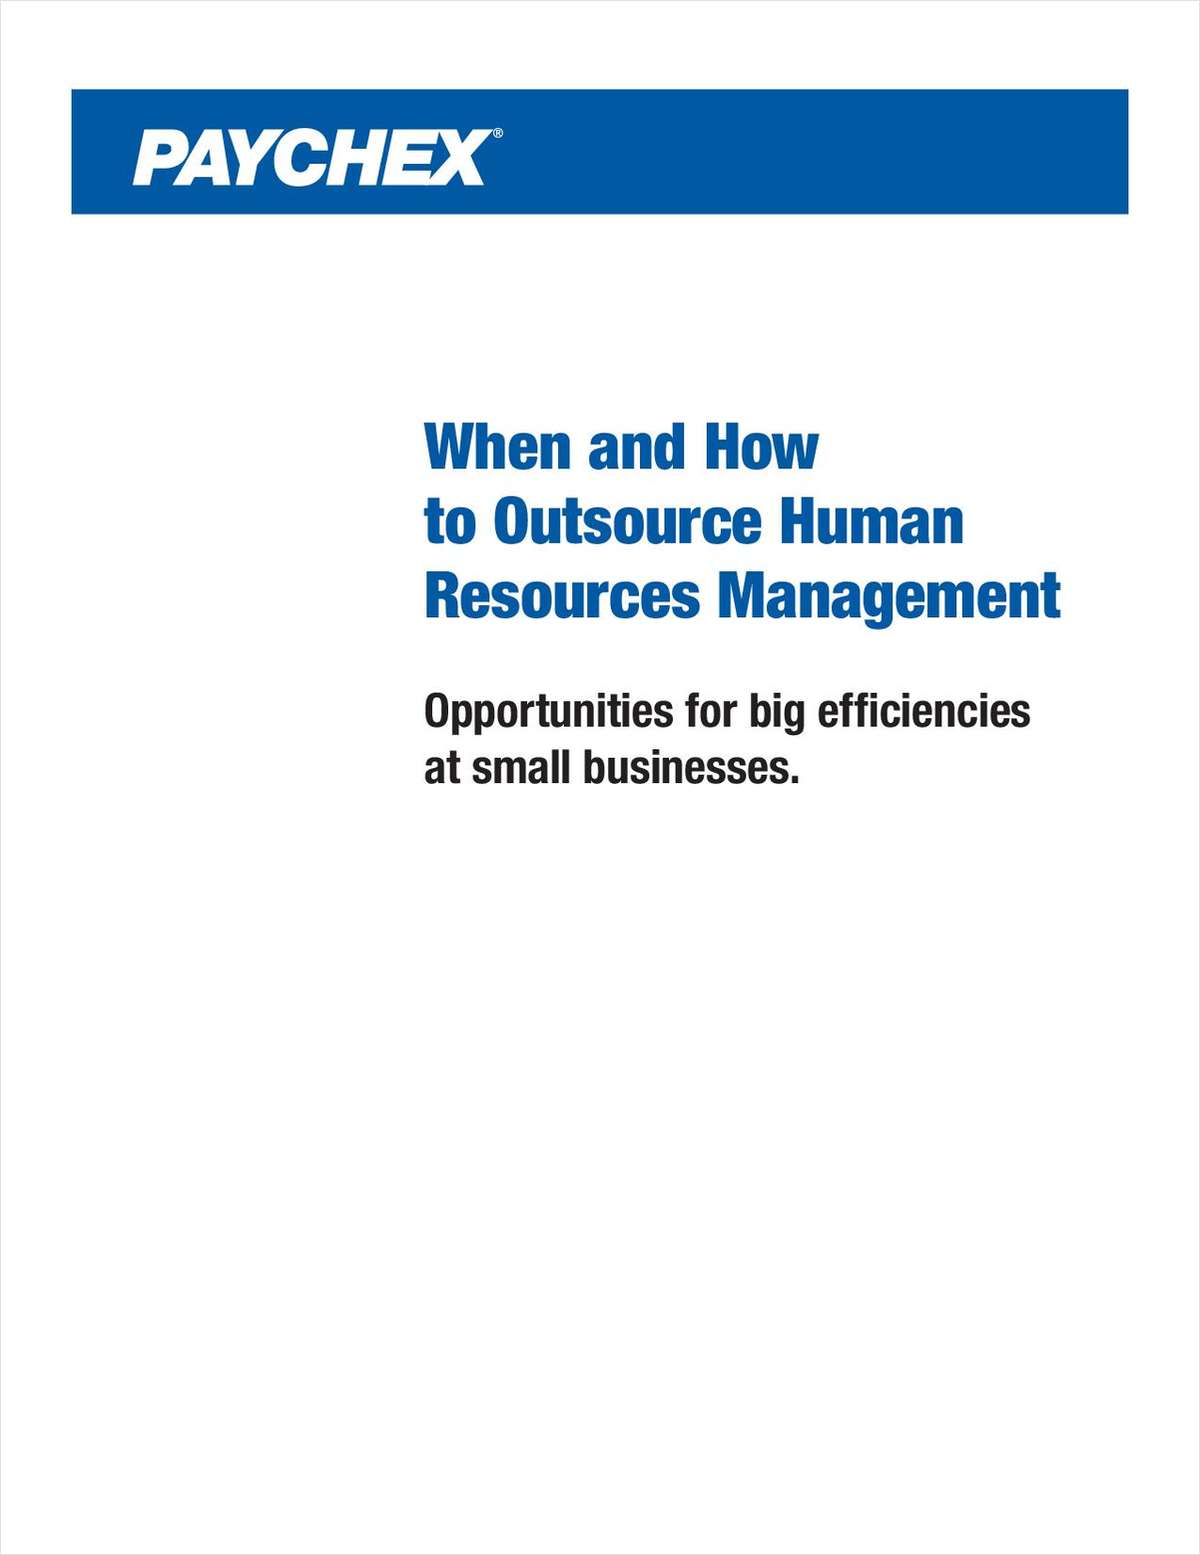 When and How to Outsource Human Resources Management